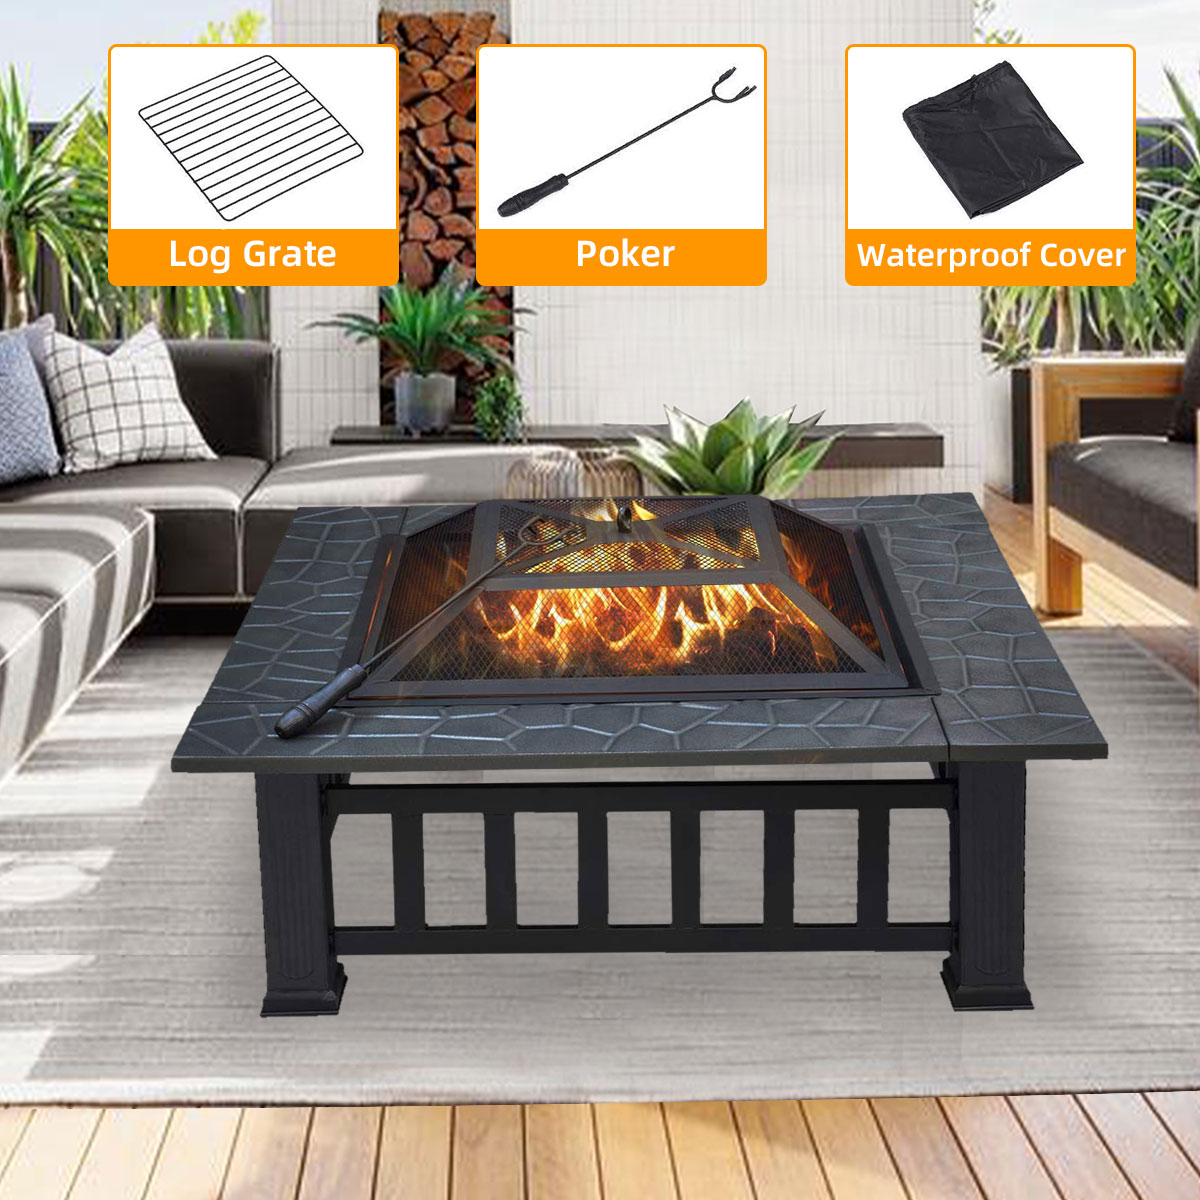 Kingso-32-Inch-Fire-Pit-Square-Steel-Wood-Burning-Large-Firepits-with-Waterproof-Cover-Spark-ScreenL-1787362-8